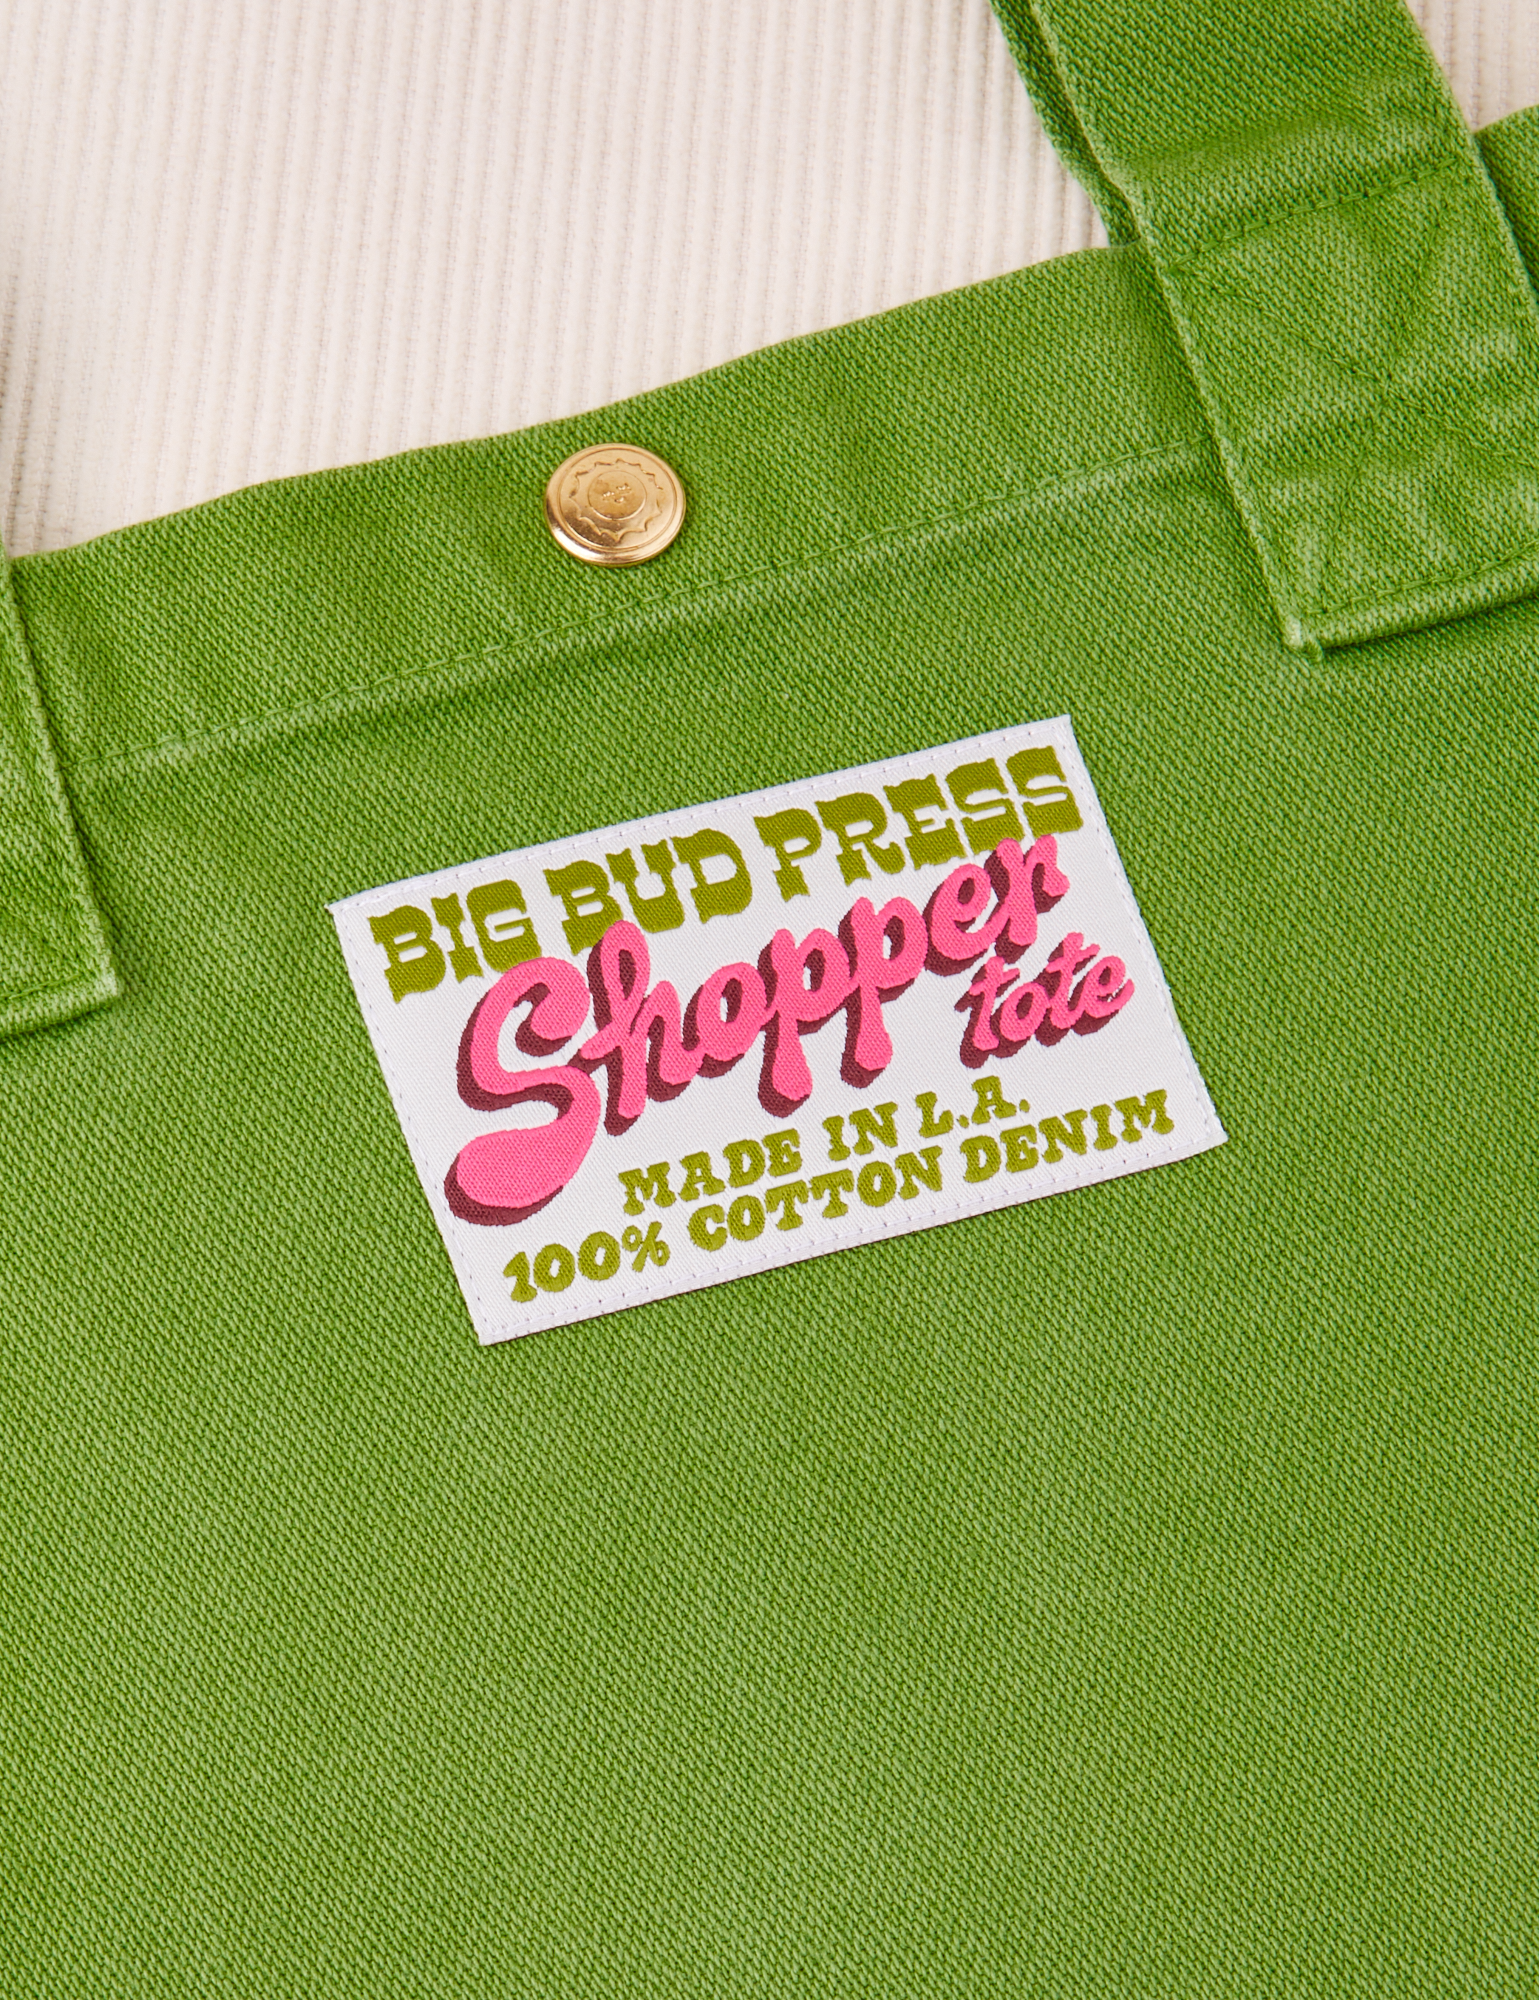 Sun baby brass snap on Shopper Tote Bag in Bright Olive. Bag label with green and pink text that reads &quot;Big Bud Press Shopper Tote, Made in L.A., 100% Cotton Denim on white background